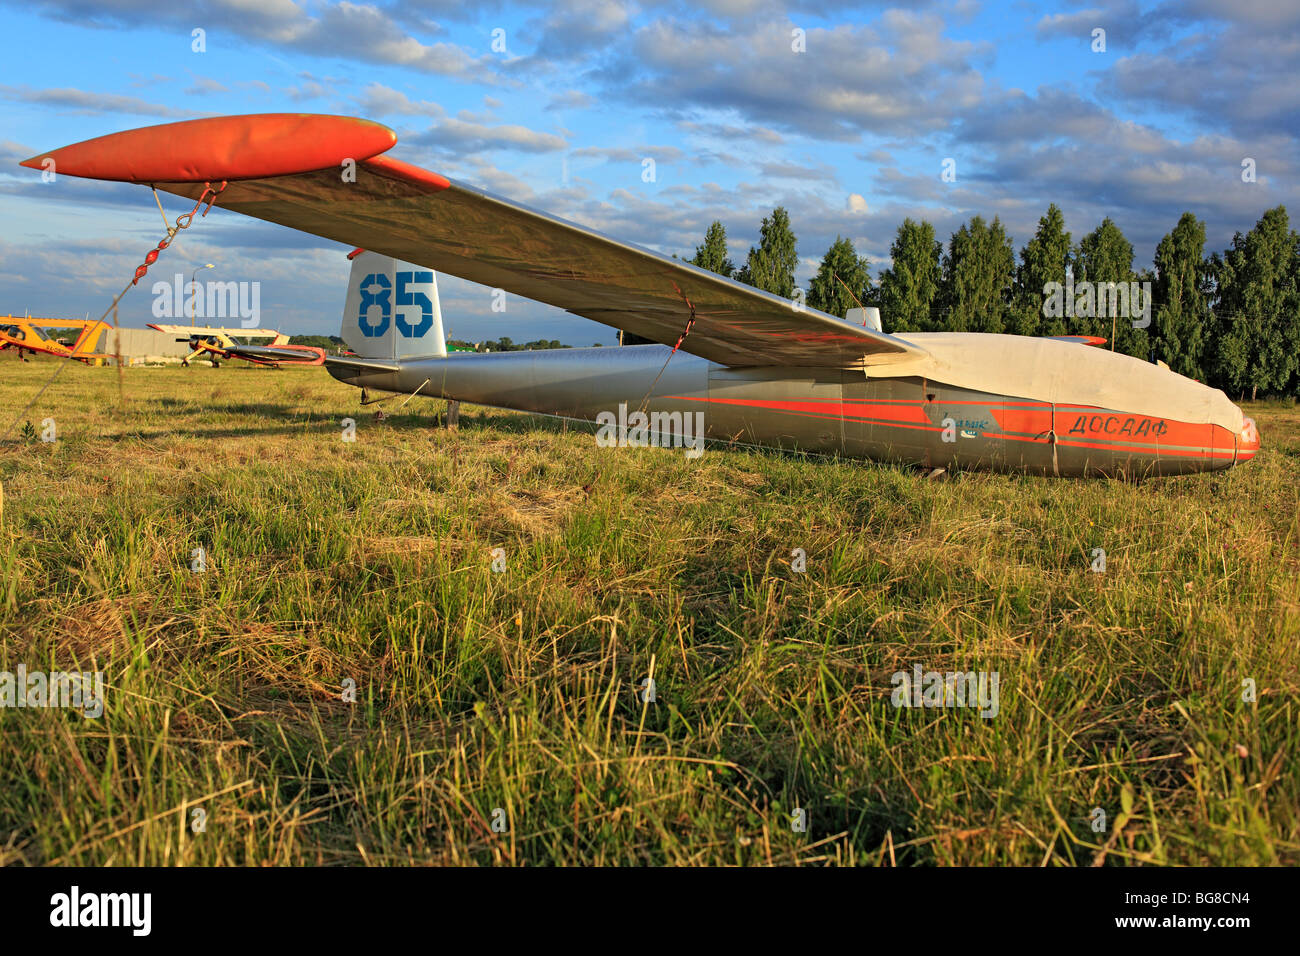 Light aircraft planes parked at a grass airfield, Russia Stock Photo